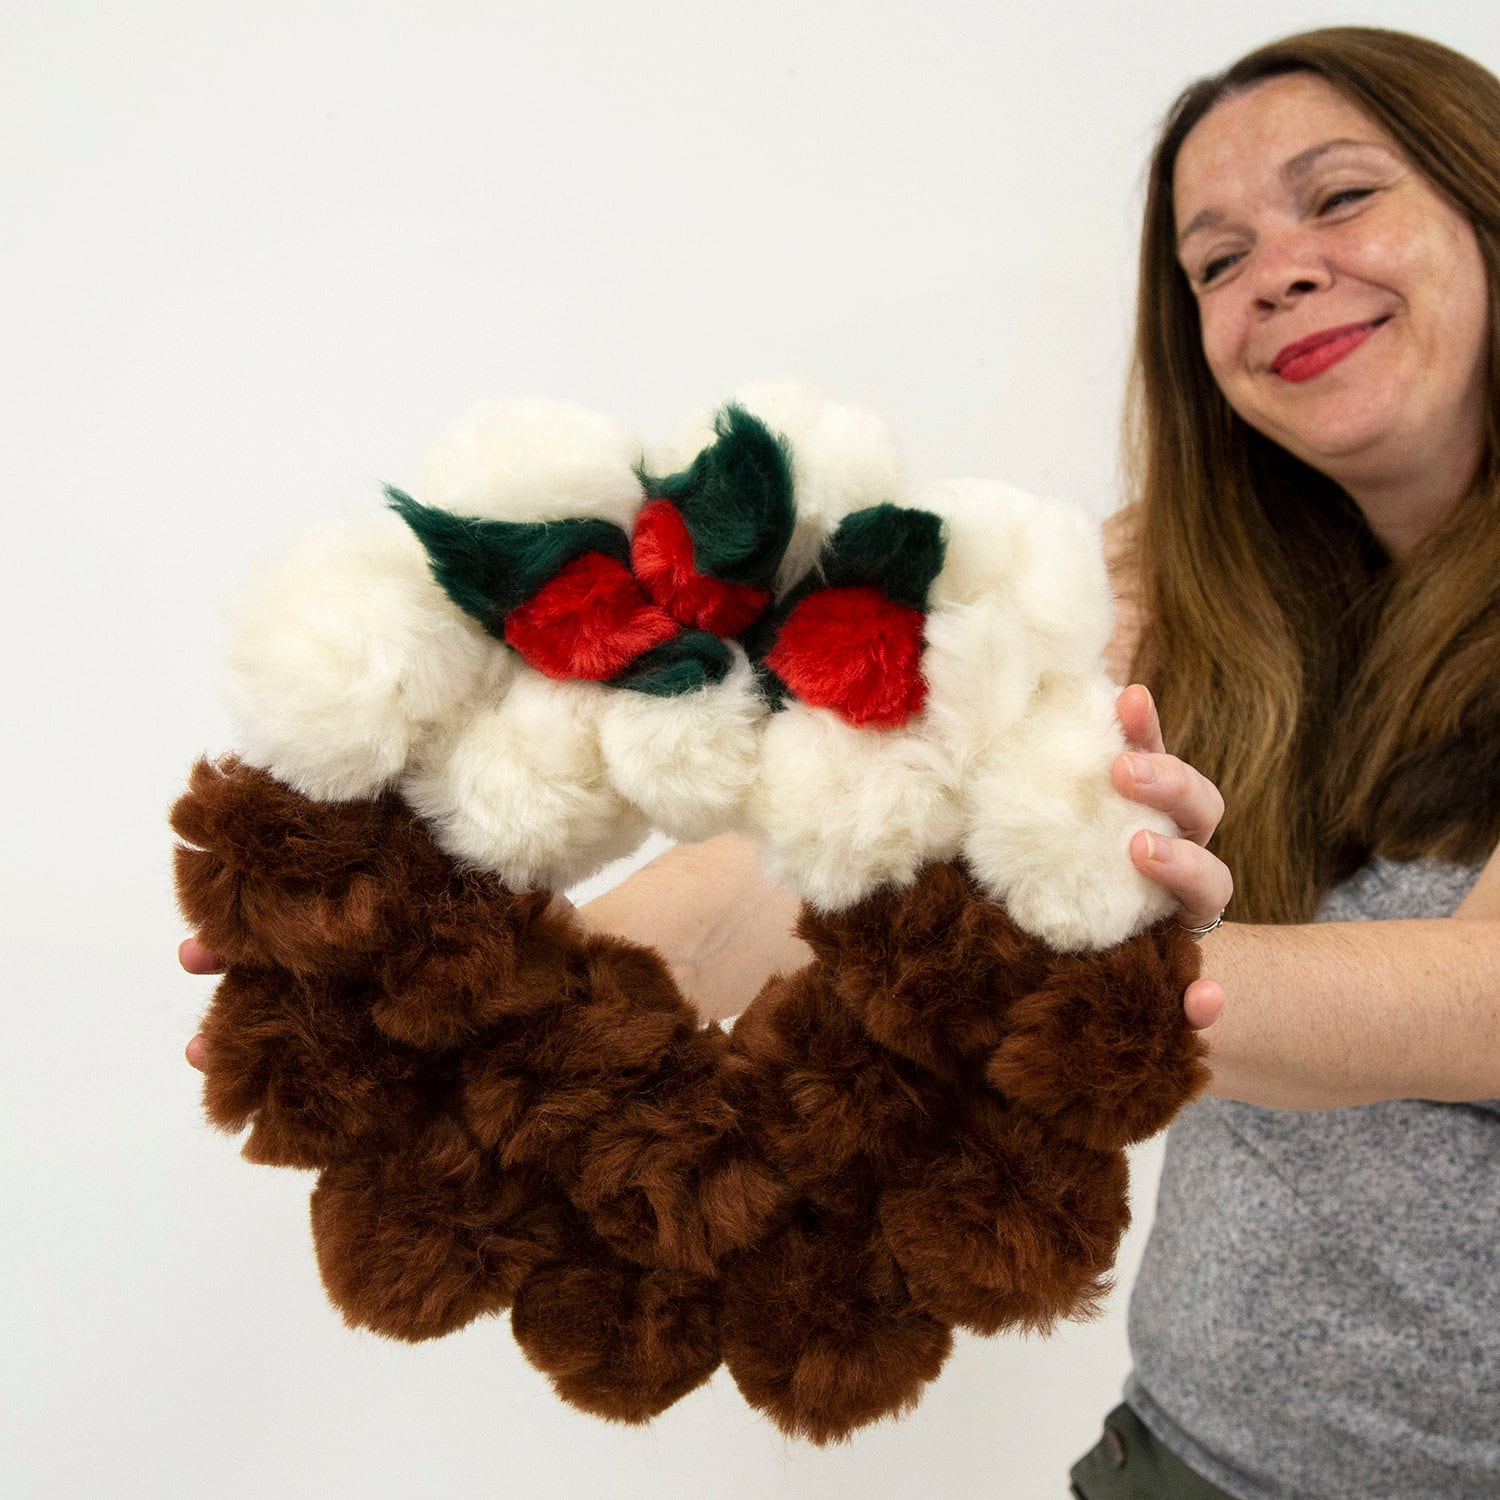 Gift Toppers: Pom Poms and Yarn - Hello Central Avenue